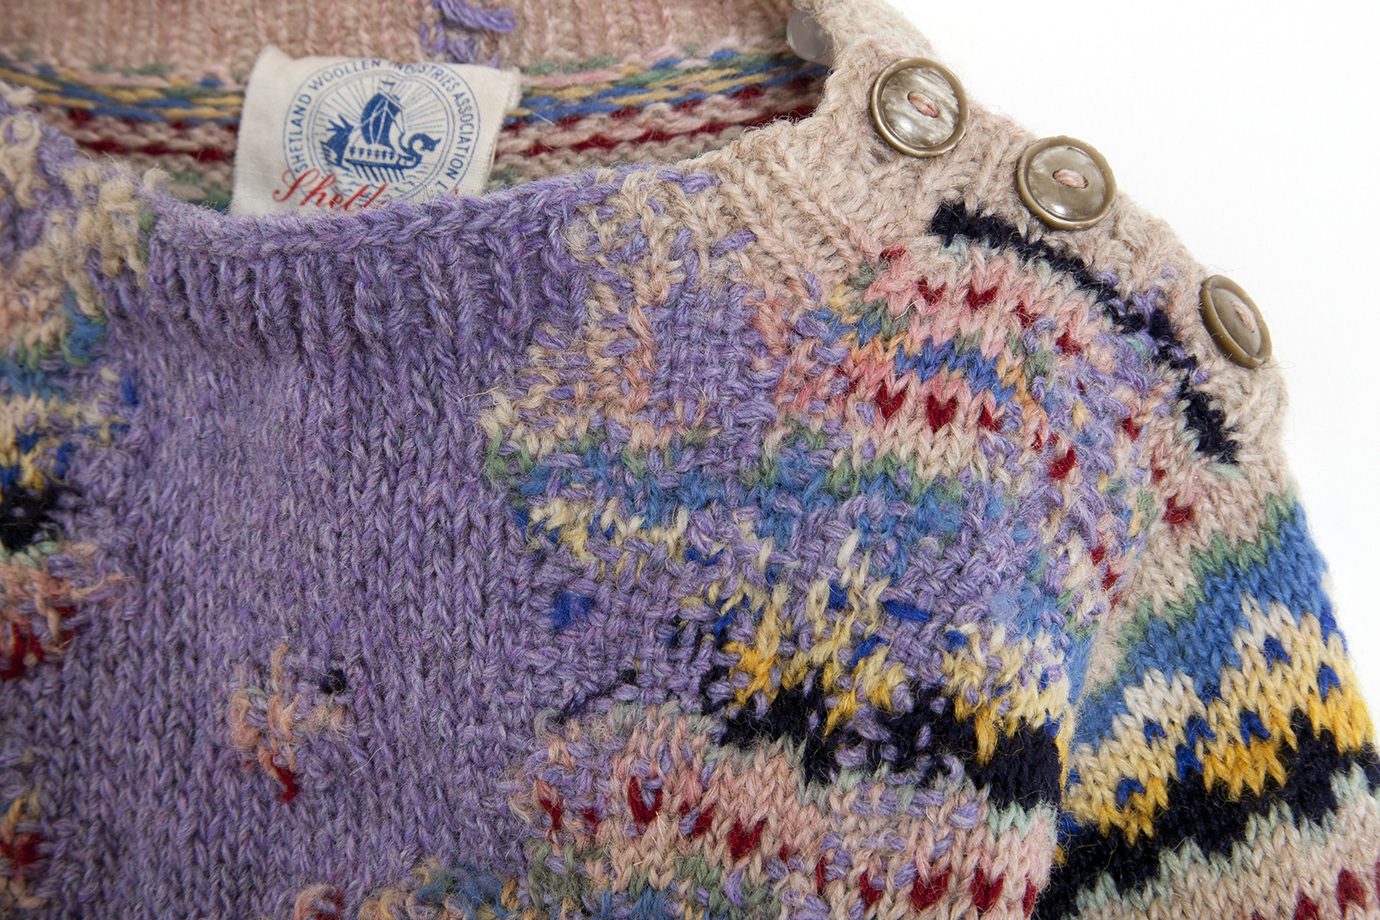 Celia Pym is mending the human heart through knit - 1 Granary